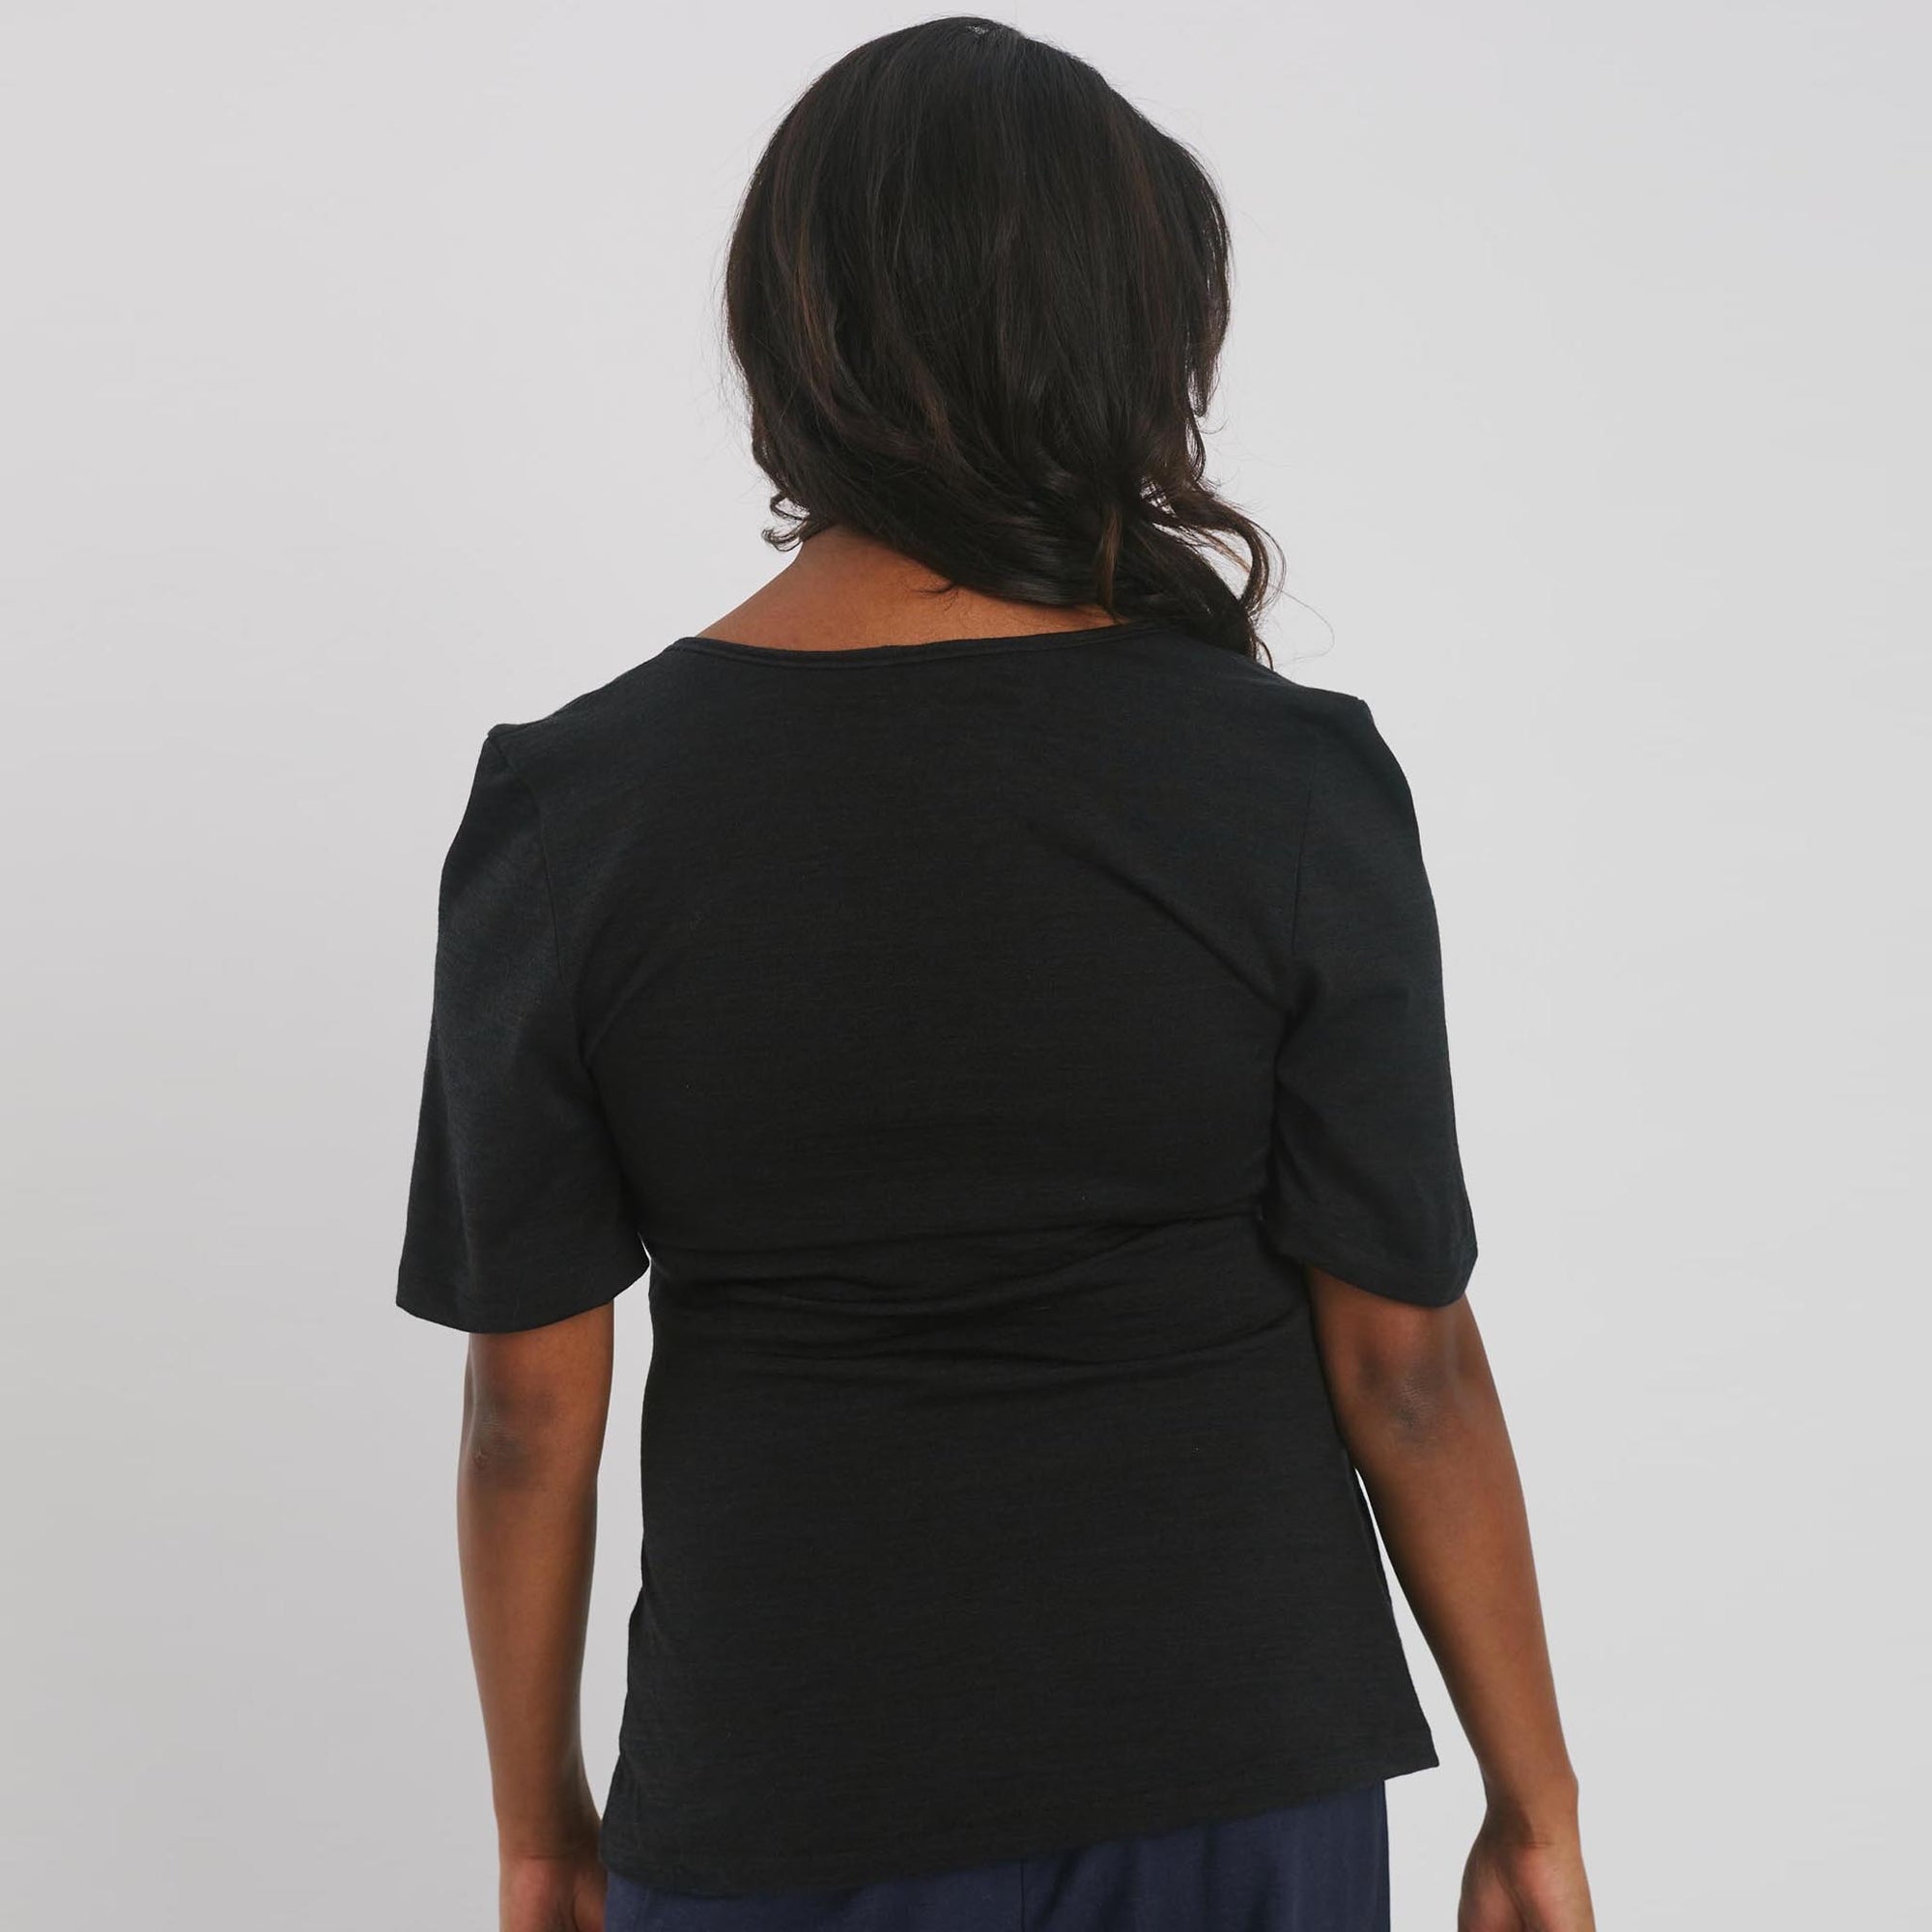 The Wrap top Shirts & Tops - The Shapes United